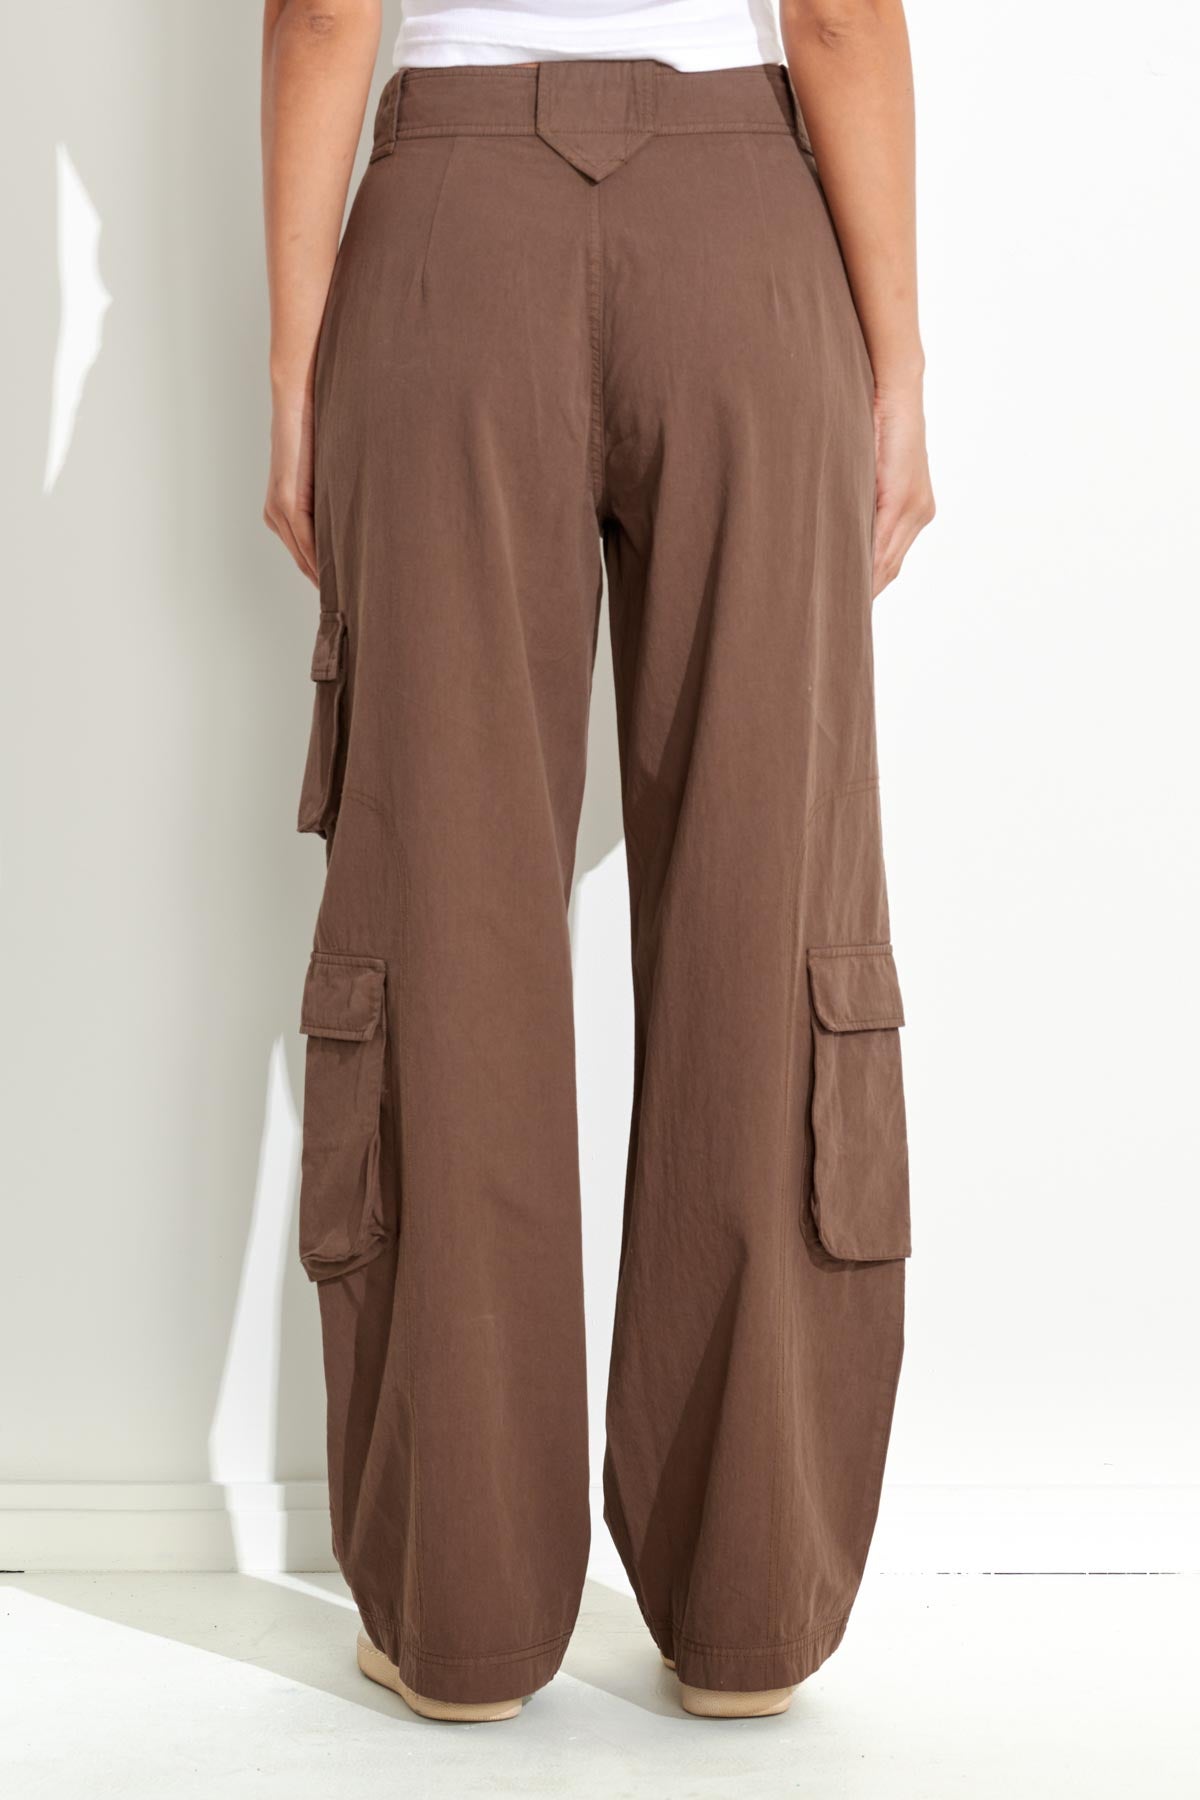 WATER PIPE CARGO PANT - Chocolate